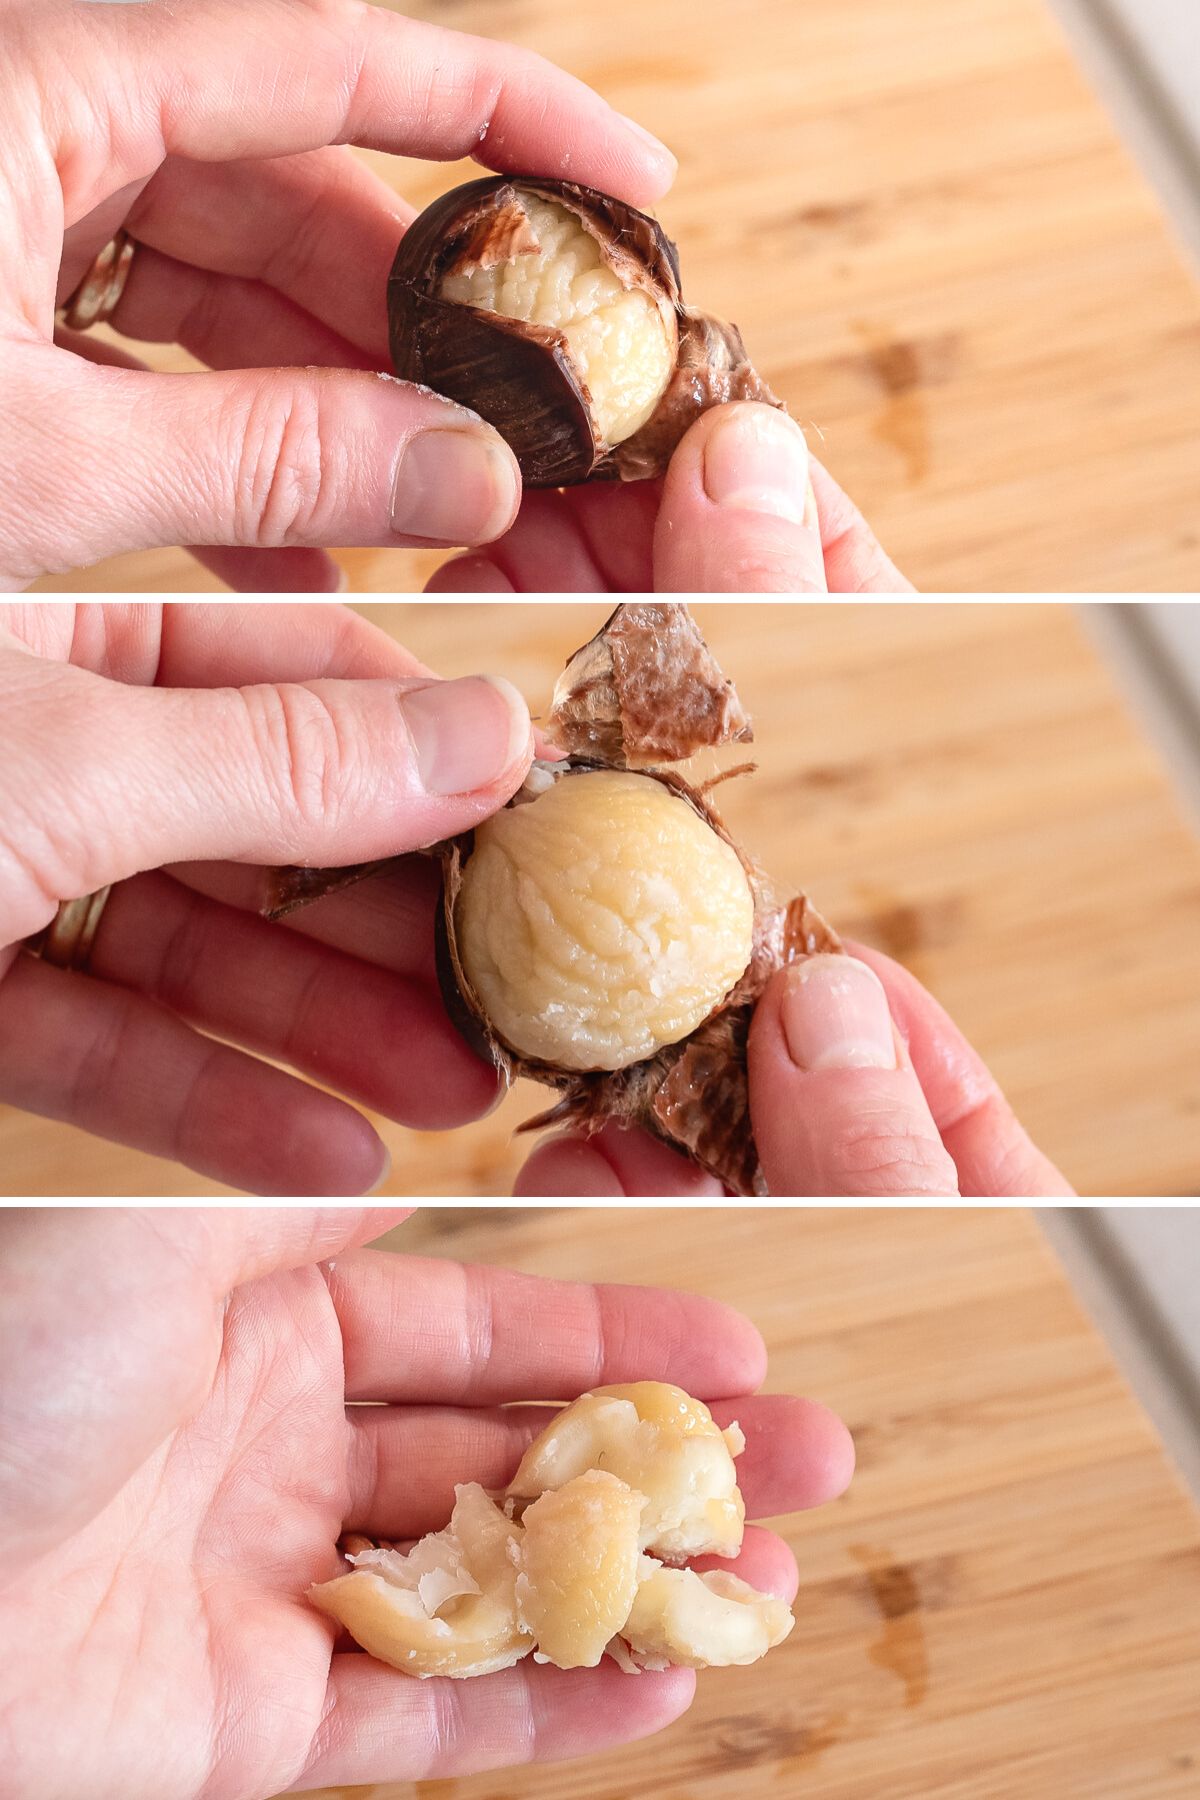 try to peel boiled chestnuts whole